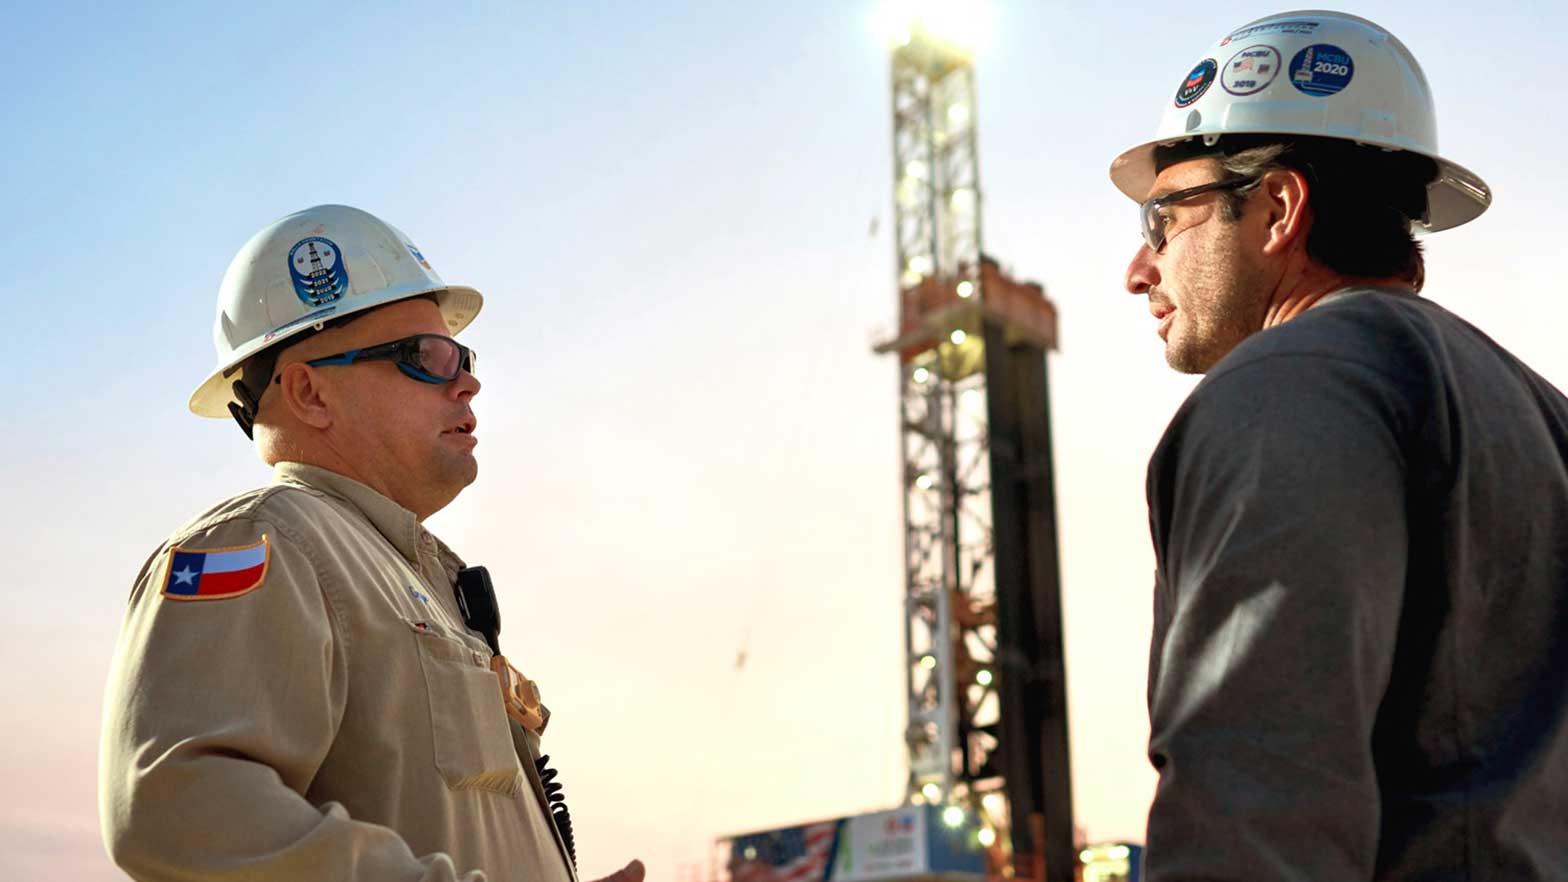 two chevron workers discuss the area and issues